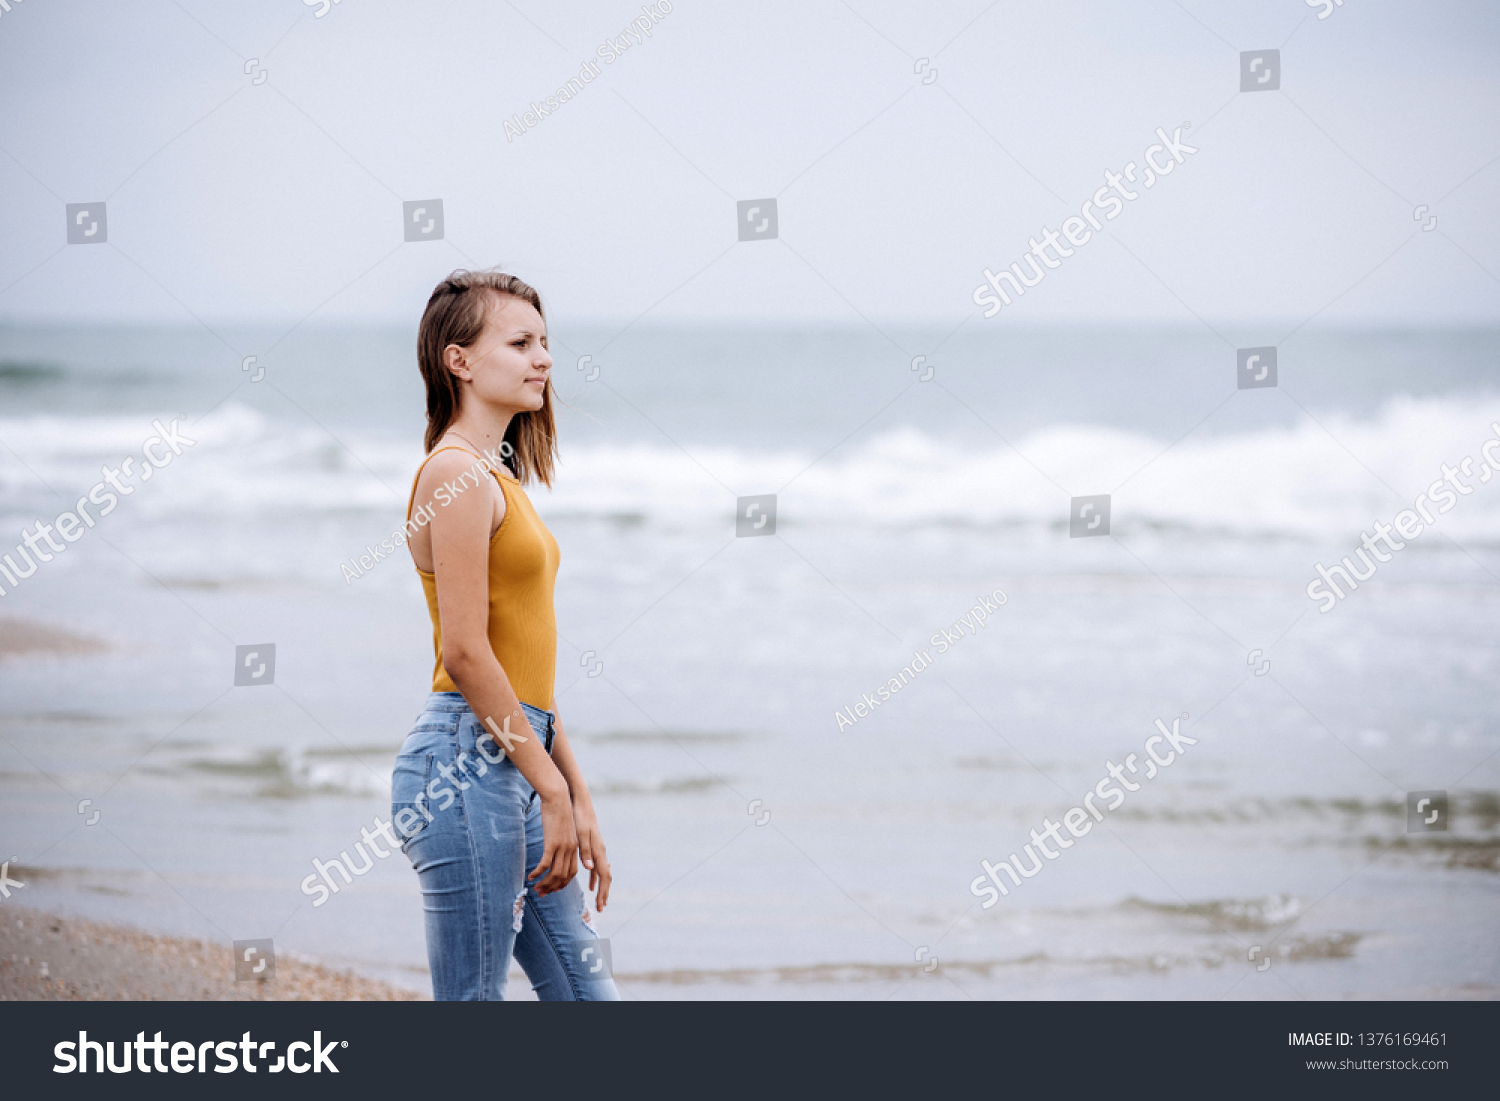 Young beautiful girl walking on the beach on a cloudy morning. She watches as the waves approach the shore.
 #1376169461